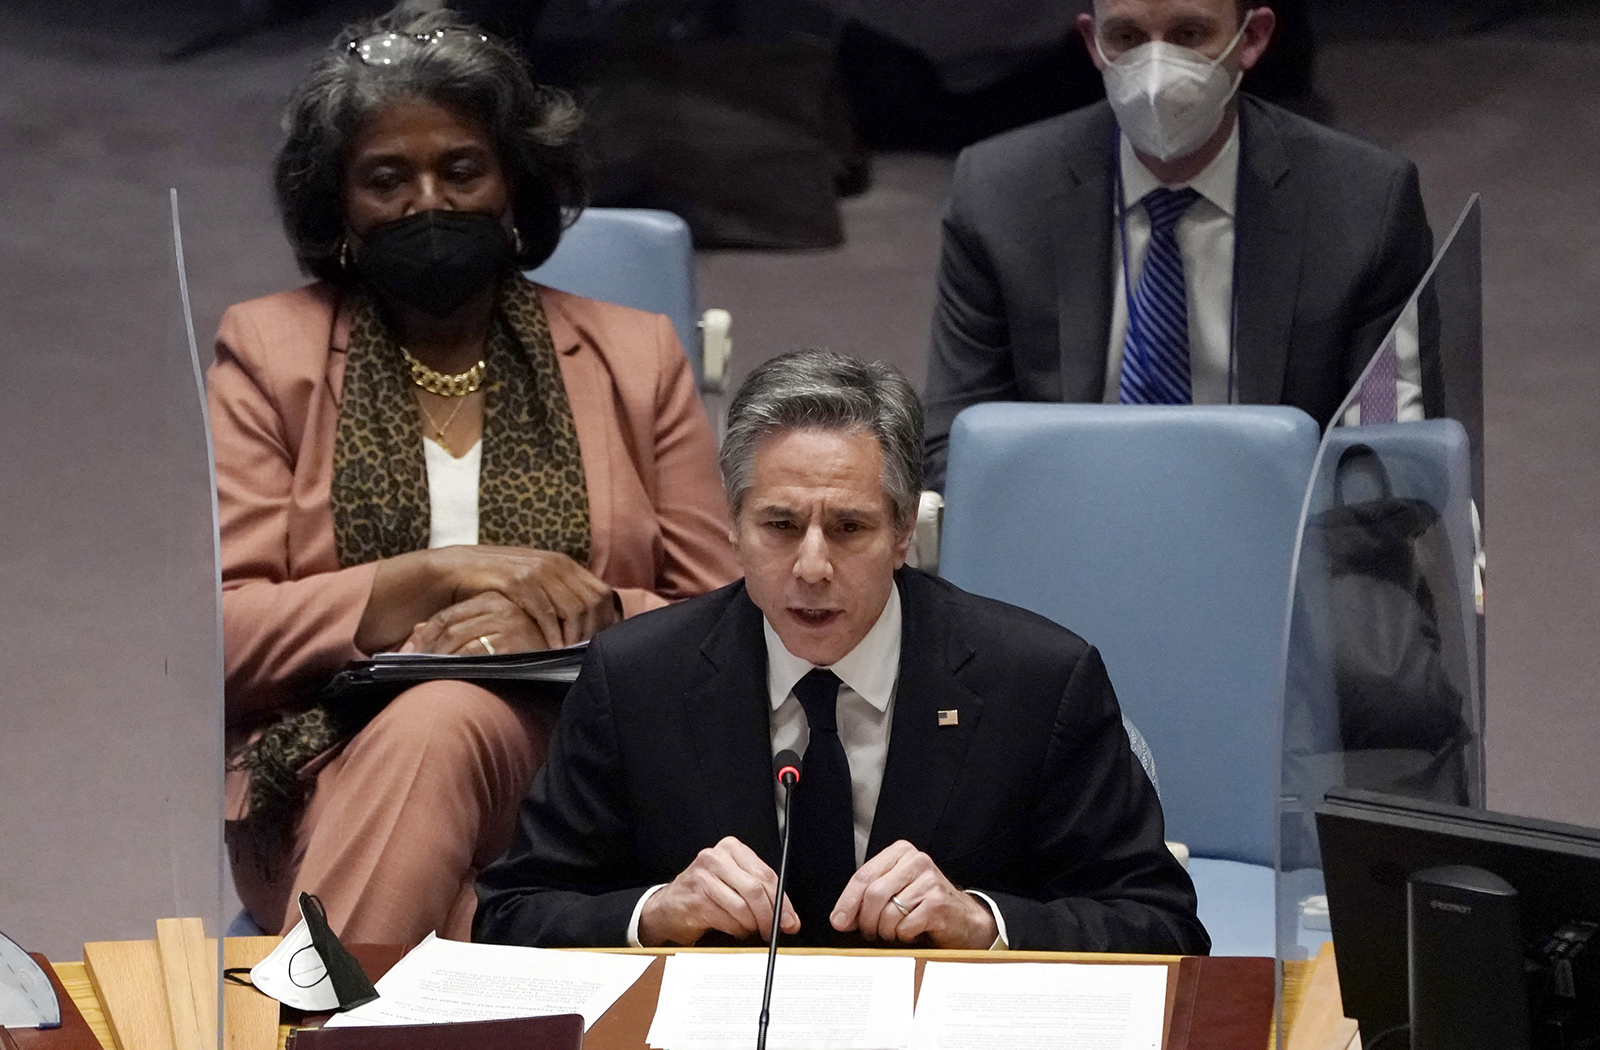 US Secretary of State Antony Blinken, with US Ambassador to the UN Linda Thomas-Greenfield, left, during a UN Security Council meeting on Ukraine, on February 17, in New York. 